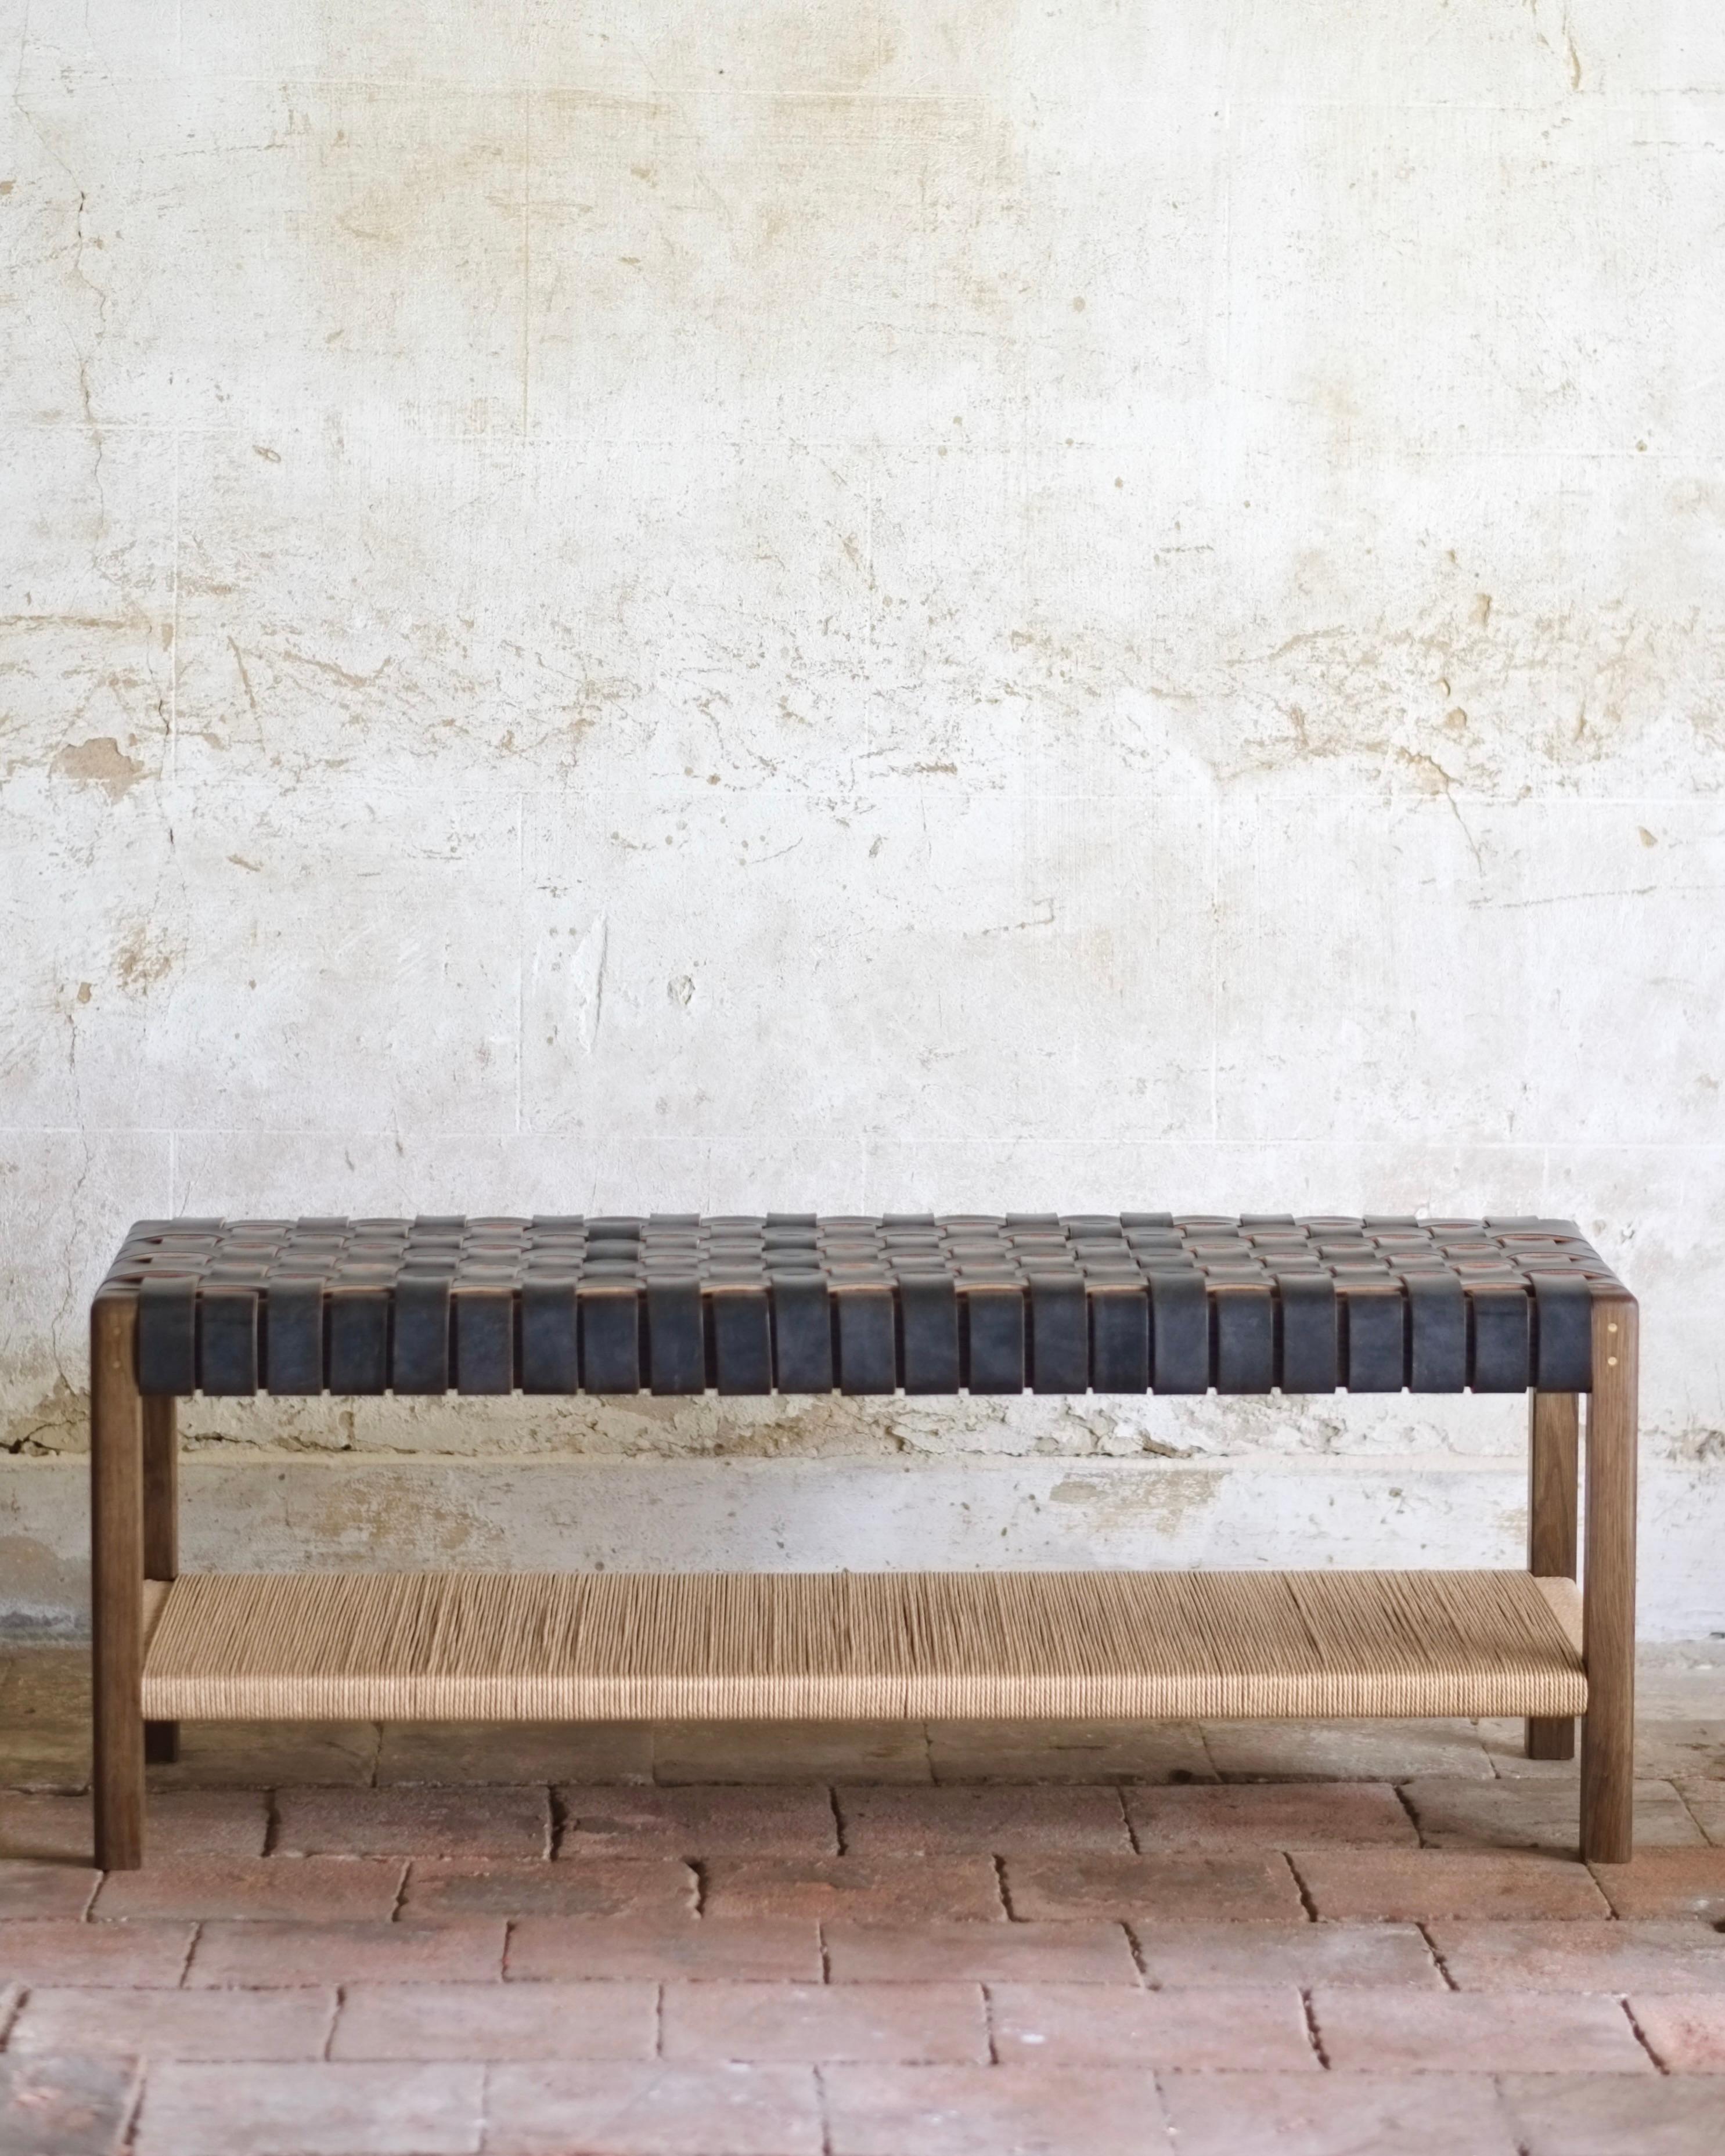 woven leather strap bench